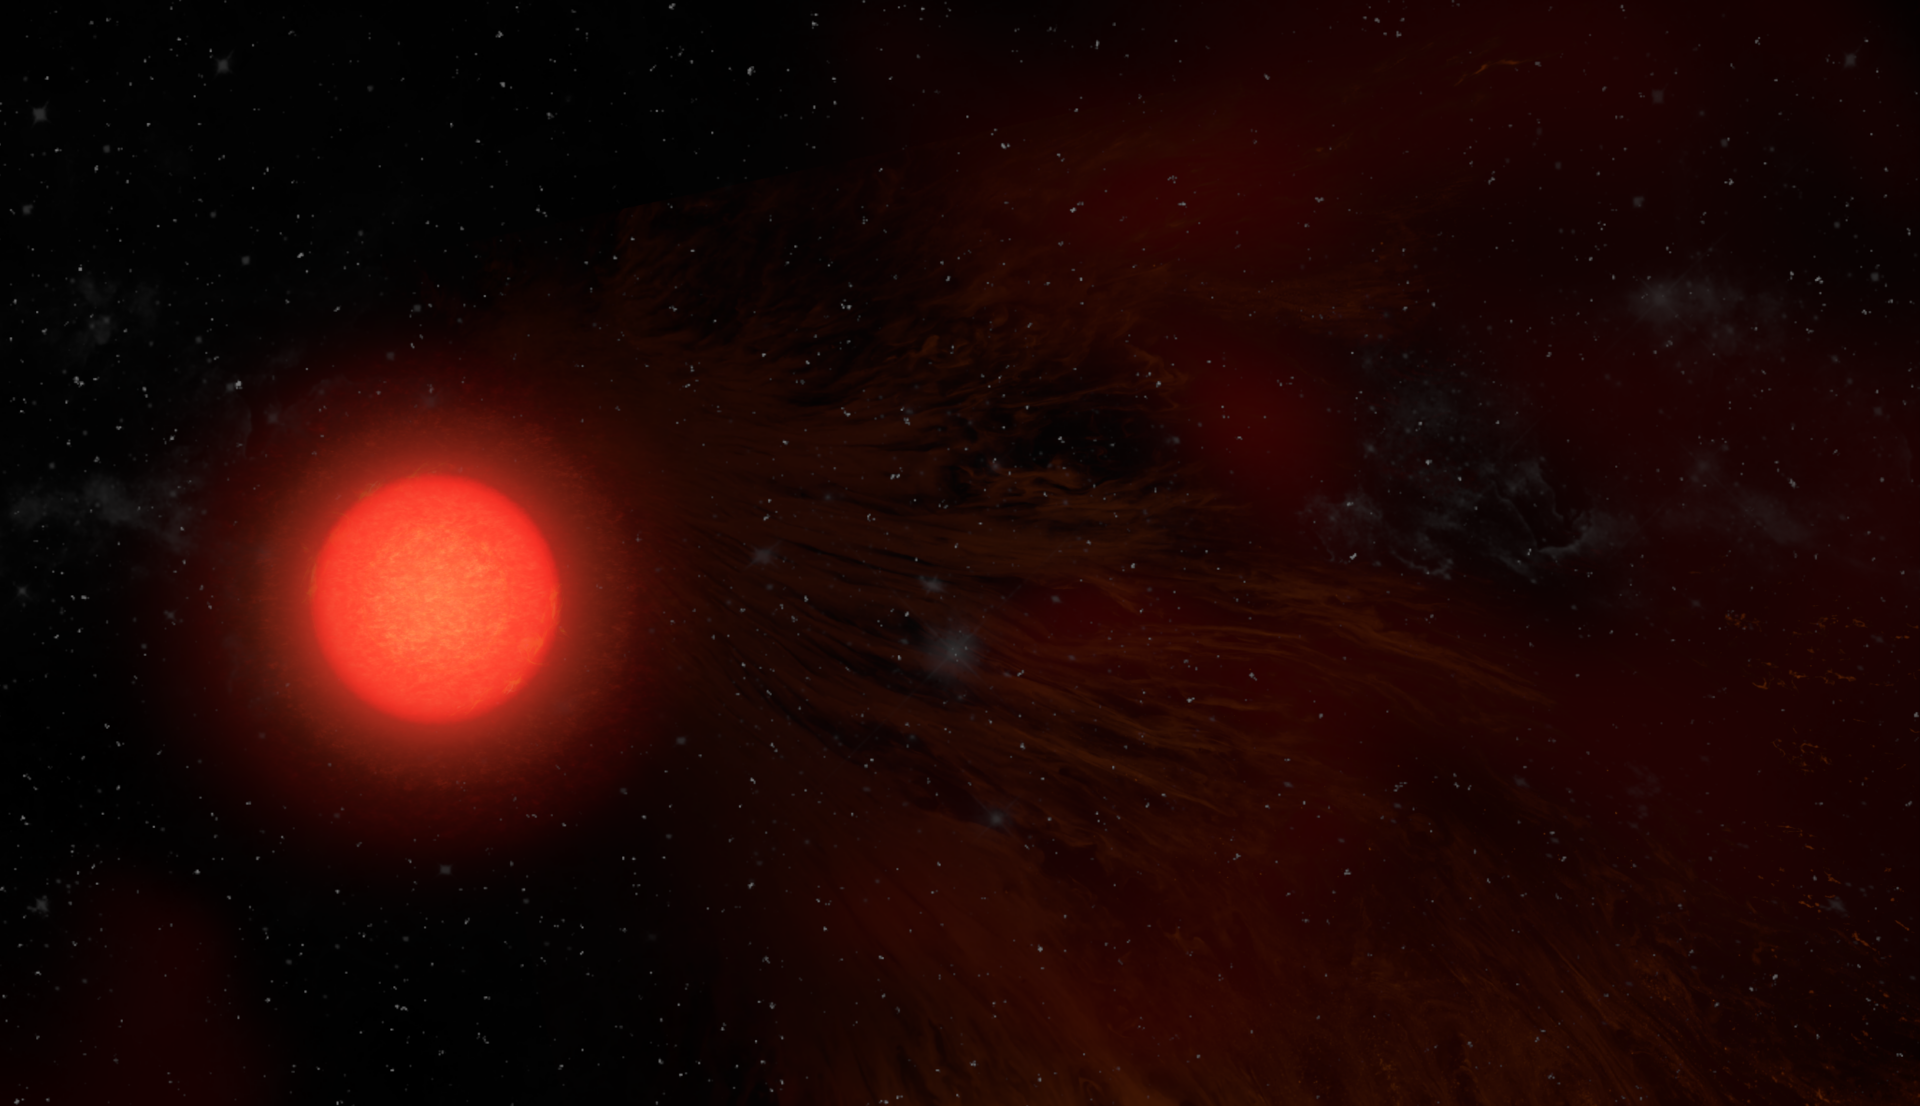 Artist impression of red supergiant star Antares Credit: NRAO/AUI/NSF, S. Dagnello